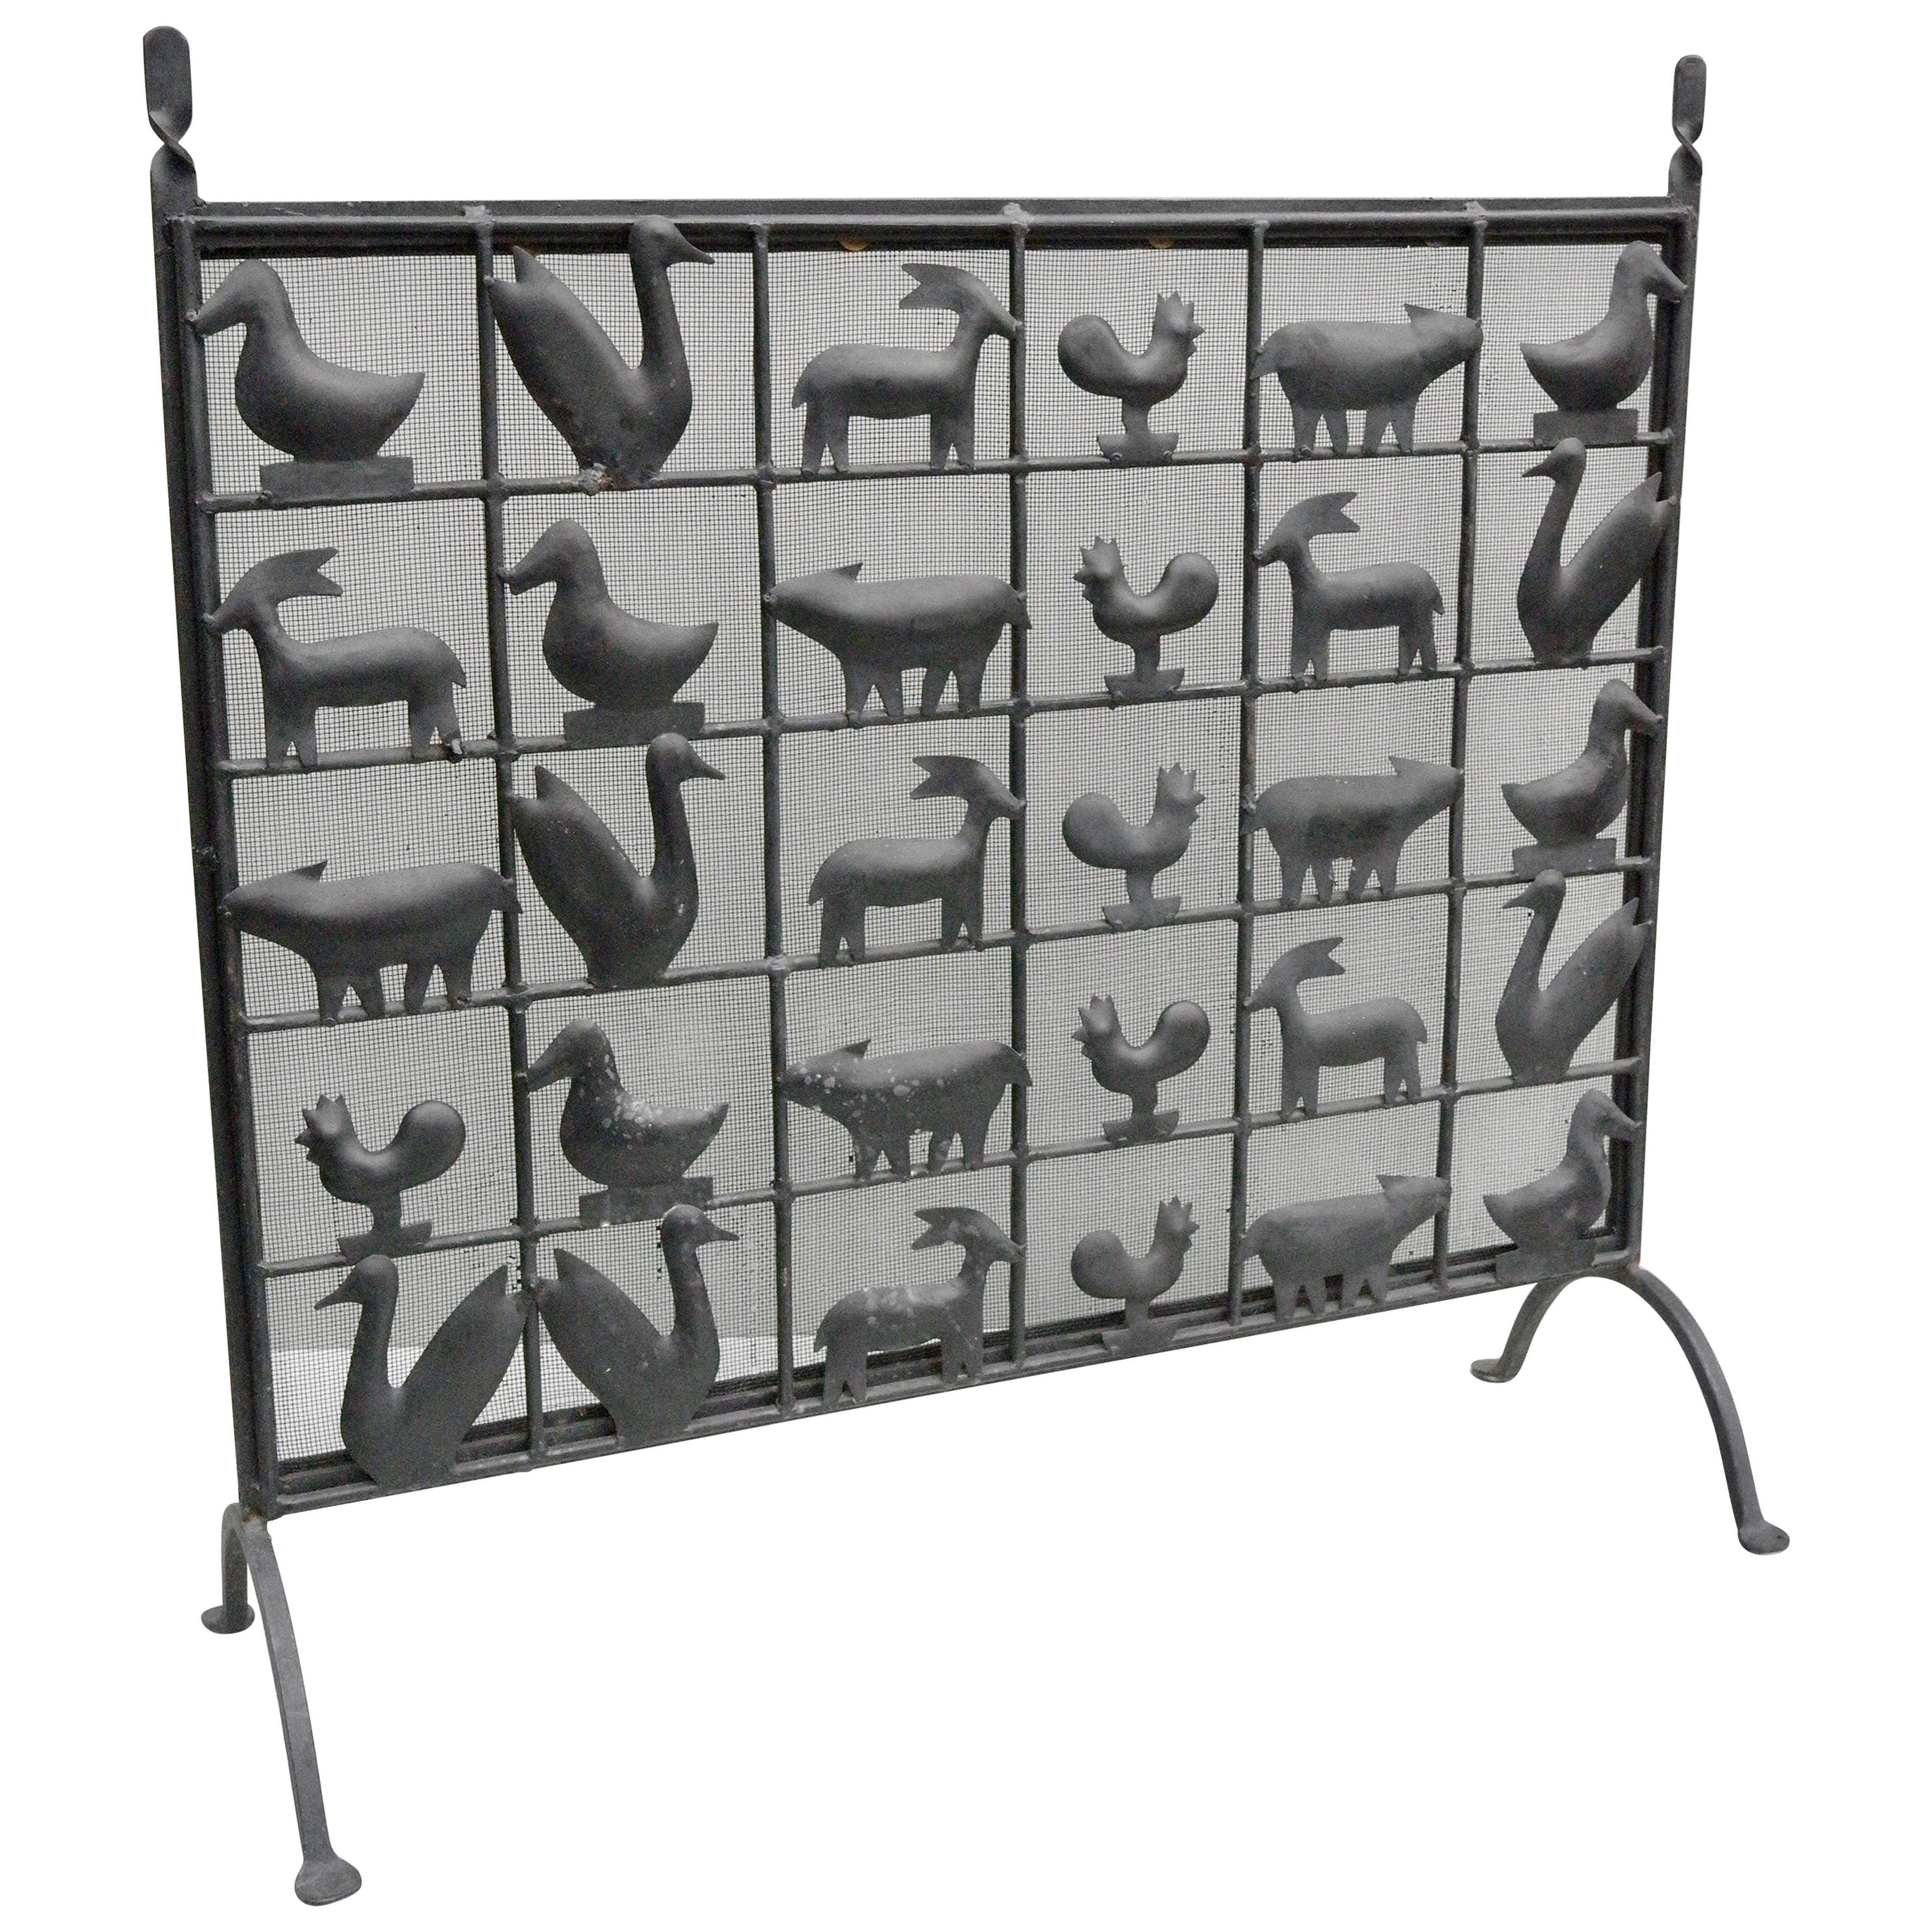 Wrought Iron Animal Fire Screen by Atelier Marolles, France, 1955